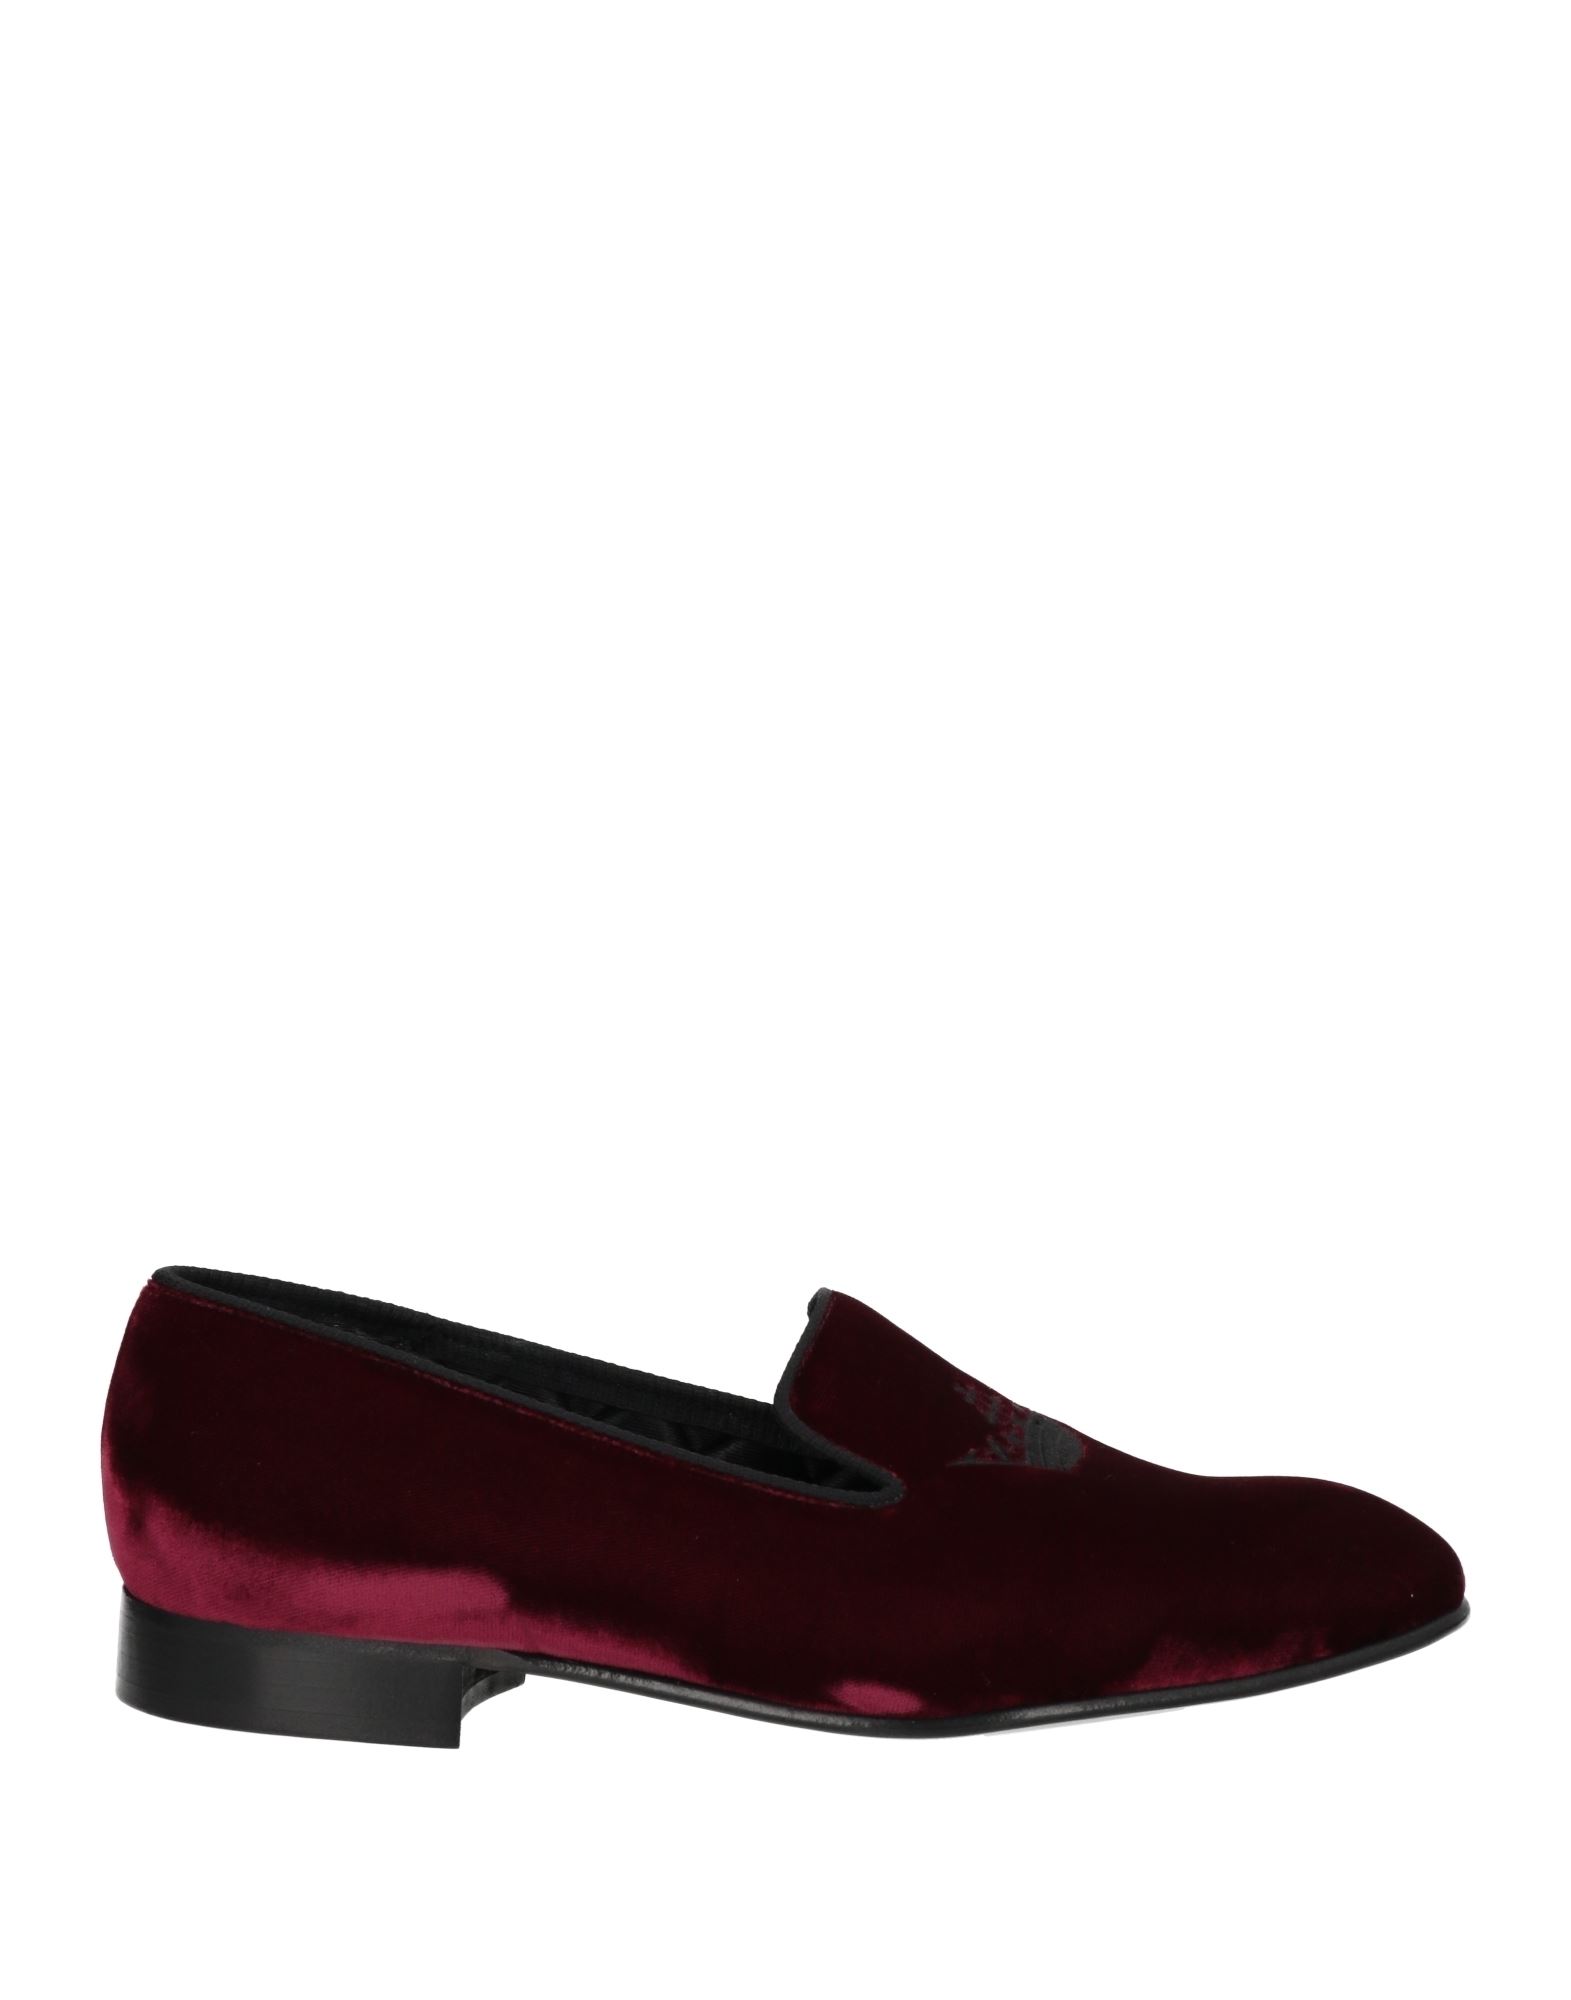 Church's Man Loafers Burgundy Size 8.5 Textile Fibers In Red